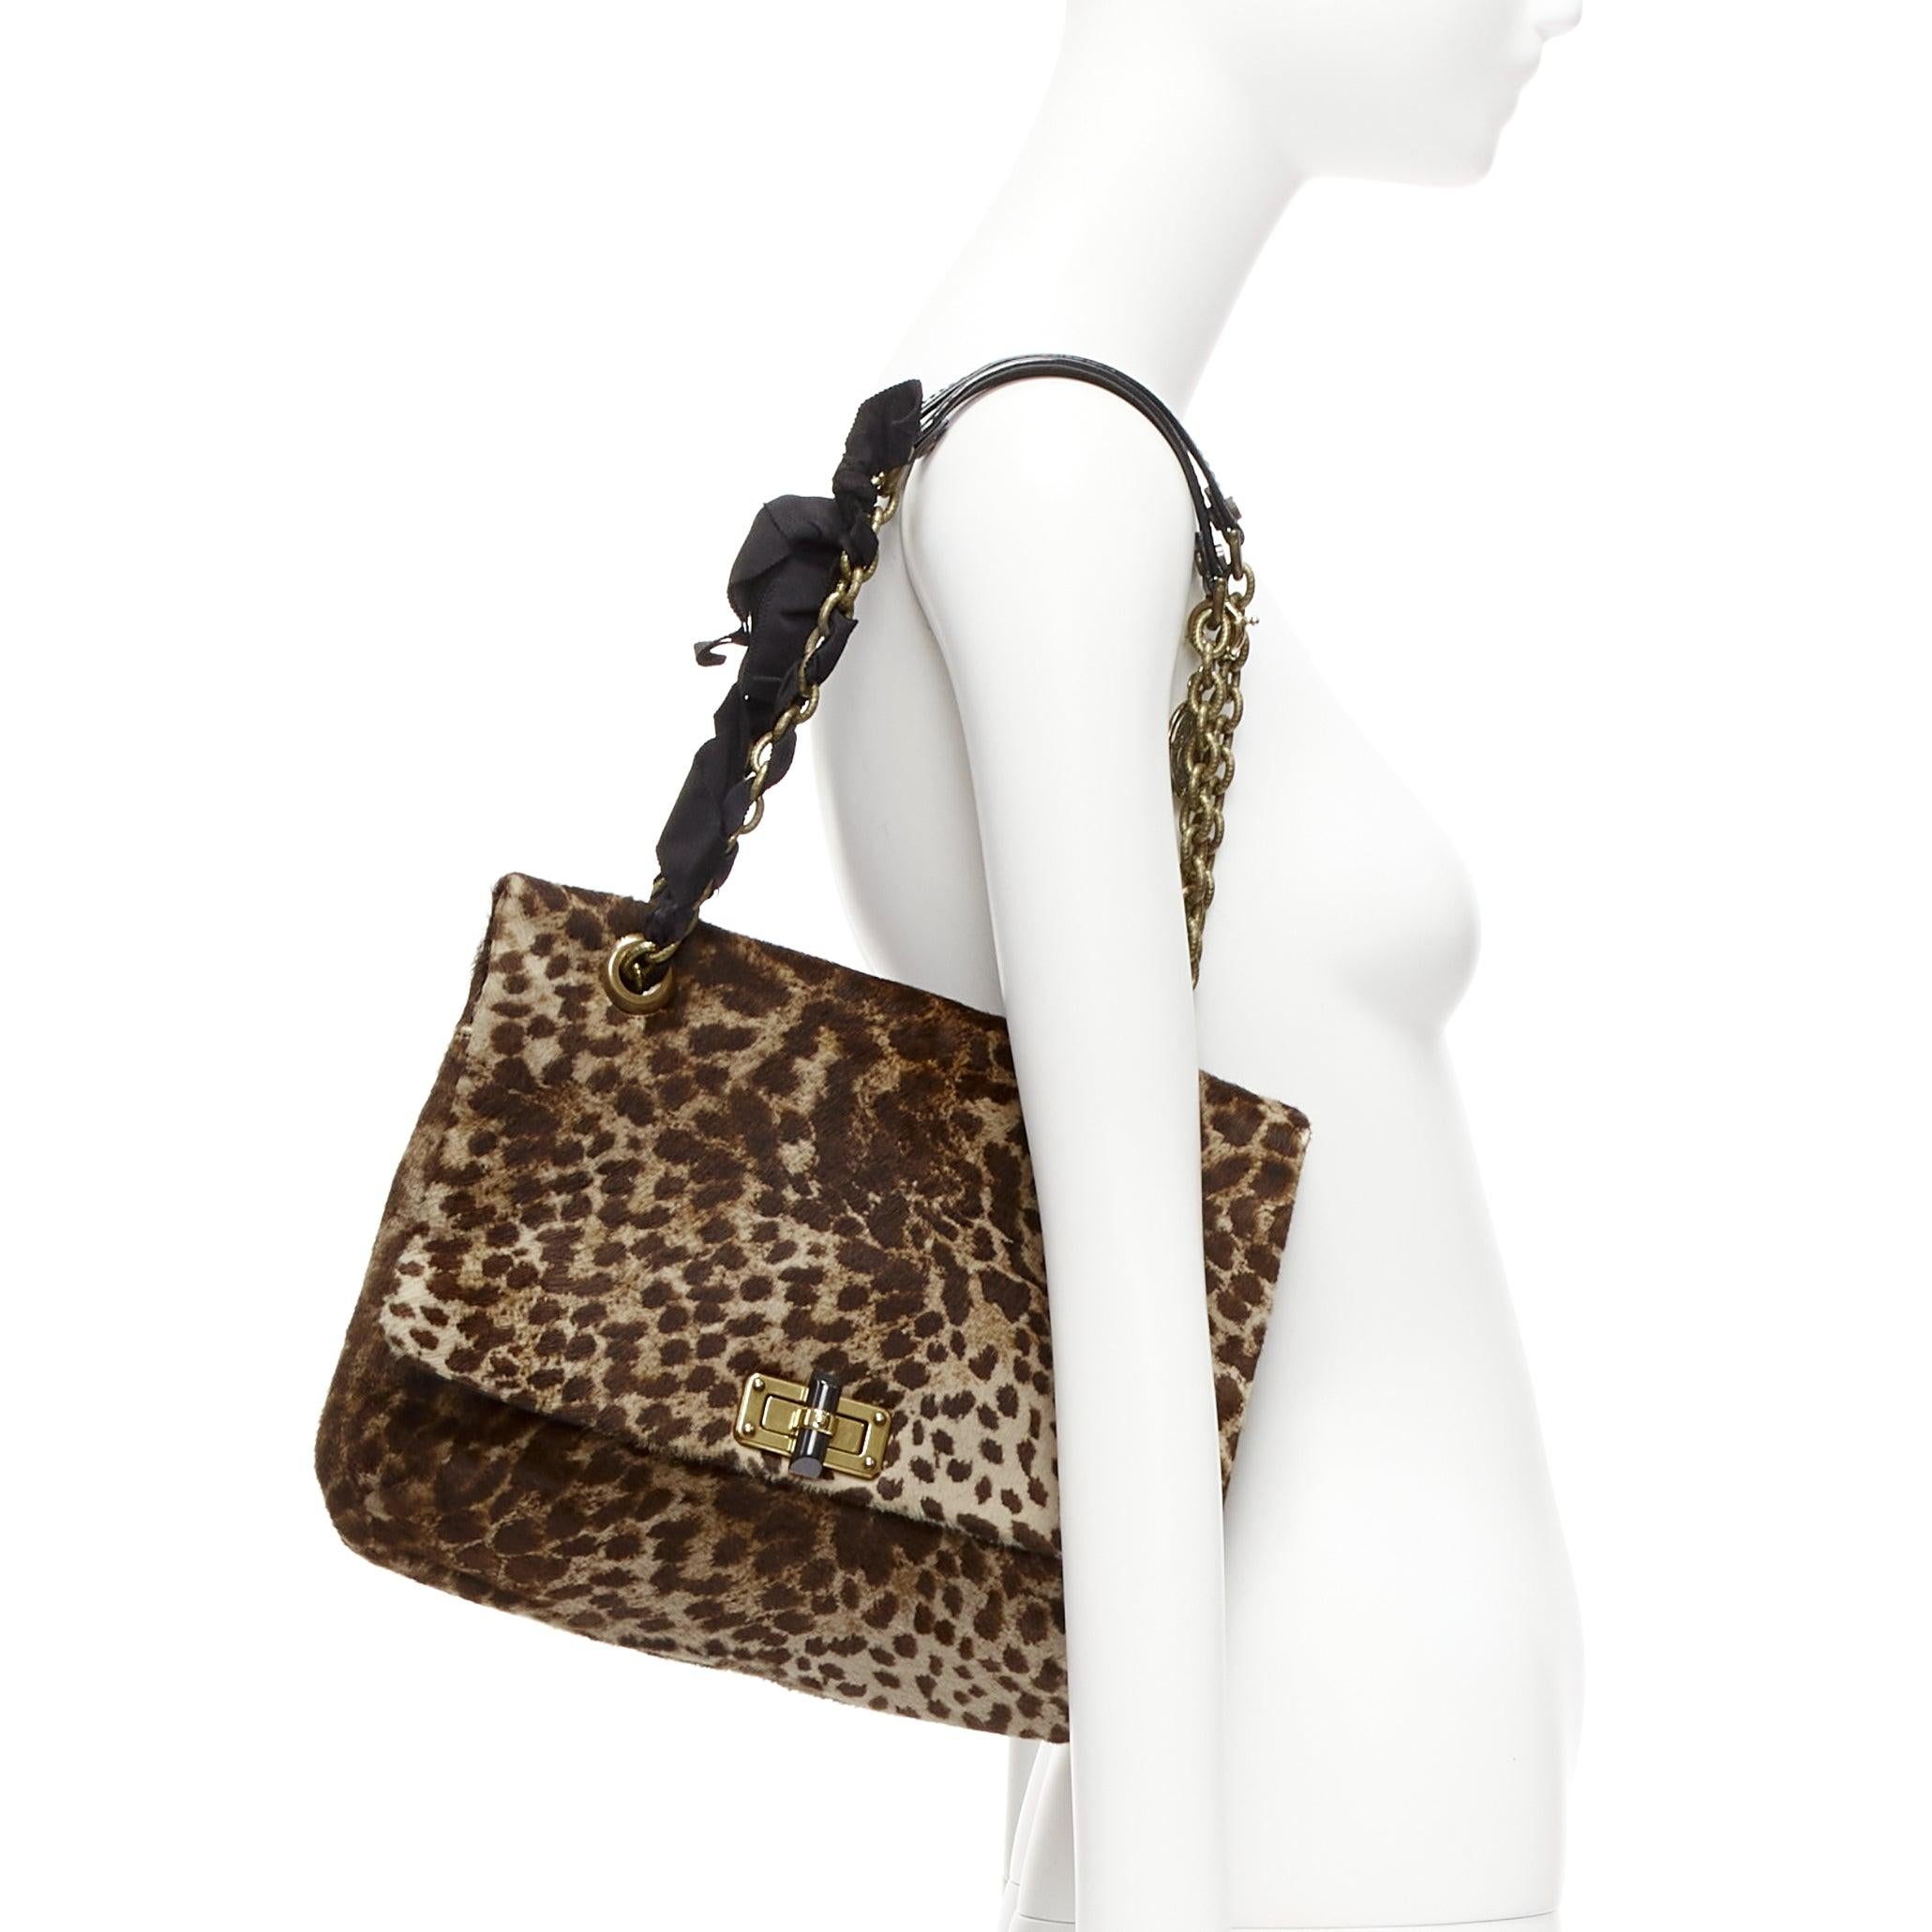 LANVIN Happy brown leopard print calfhair black ribbon chain shoulder bag
Reference: TGAS/D00973
Brand: Lanvin
Designer: Alber Elbaz
Model: Happy
Material: Pony Hair, Fabric, Leather
Color: Brown, Black
Pattern: Leopard
Closure: Turnlock
Lining: